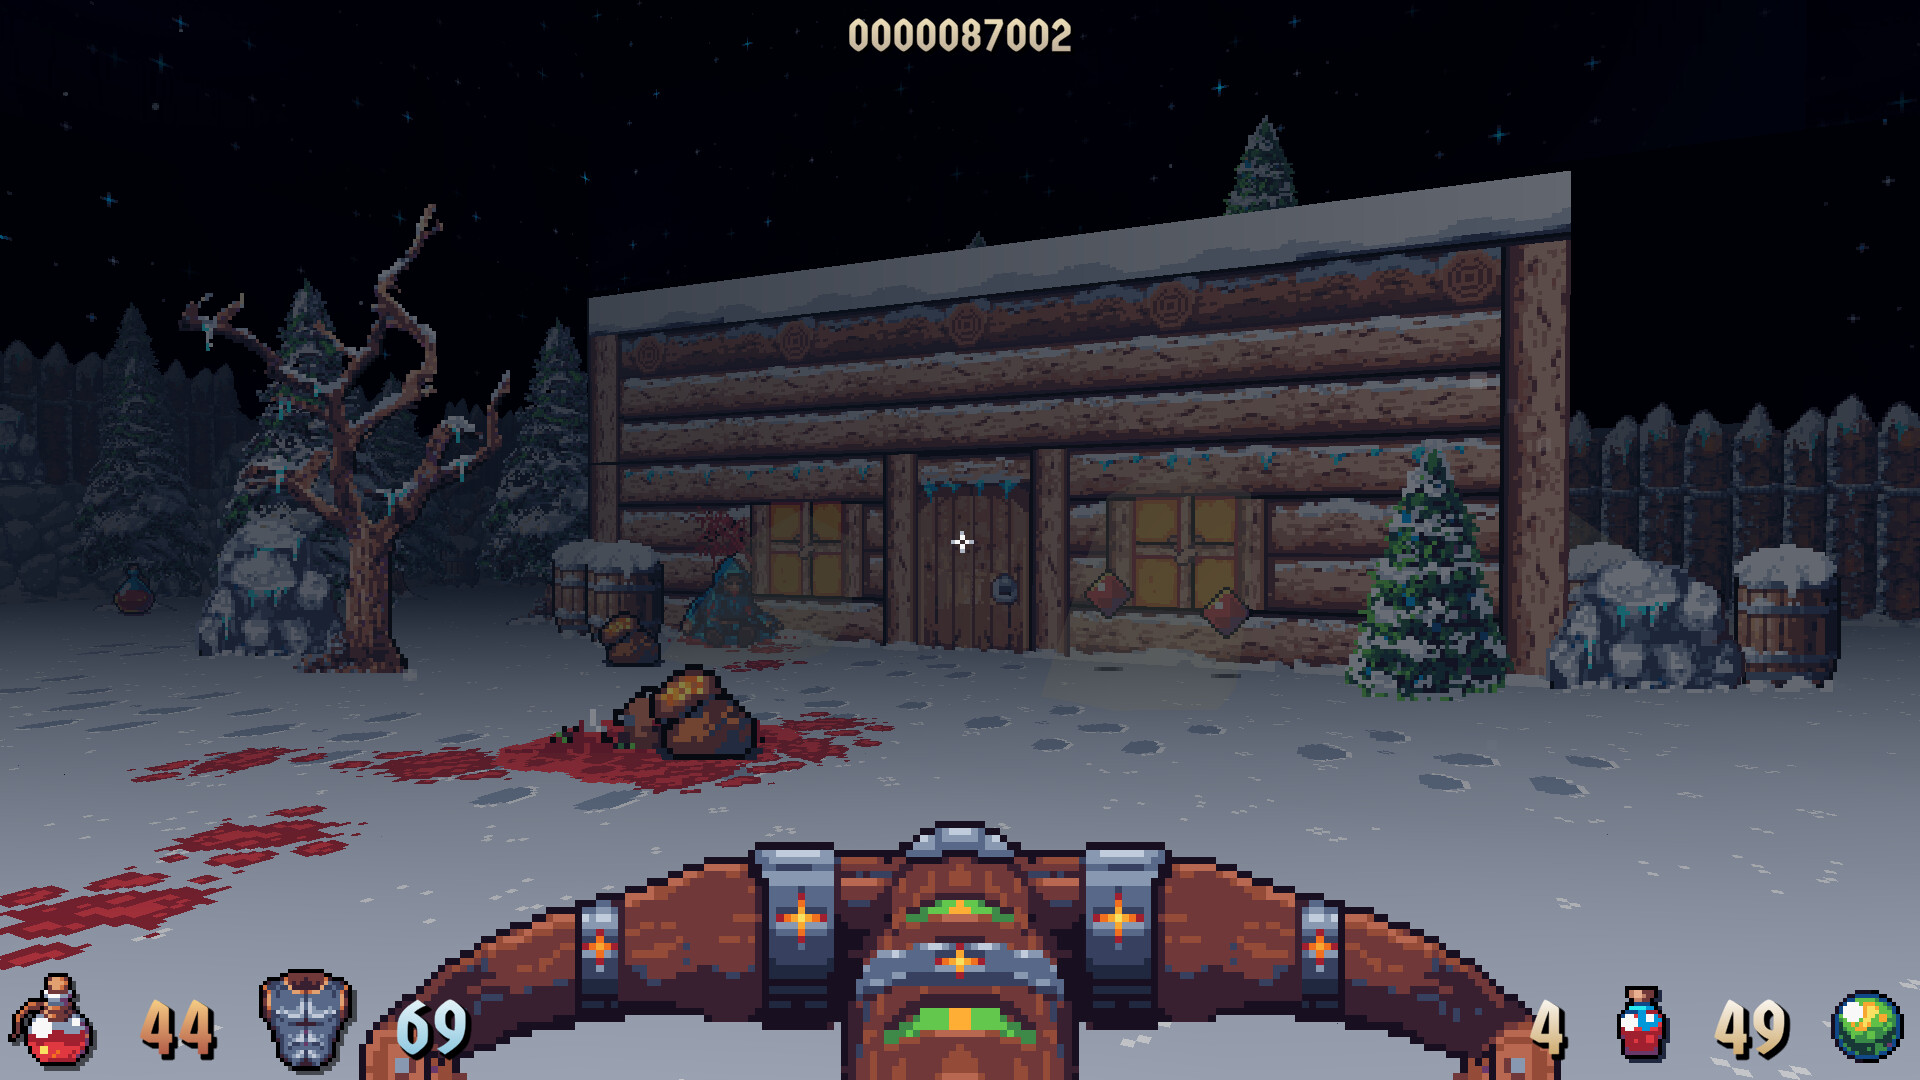 First person view holding crossbow looking at cozy cabin in a snowy field at night.